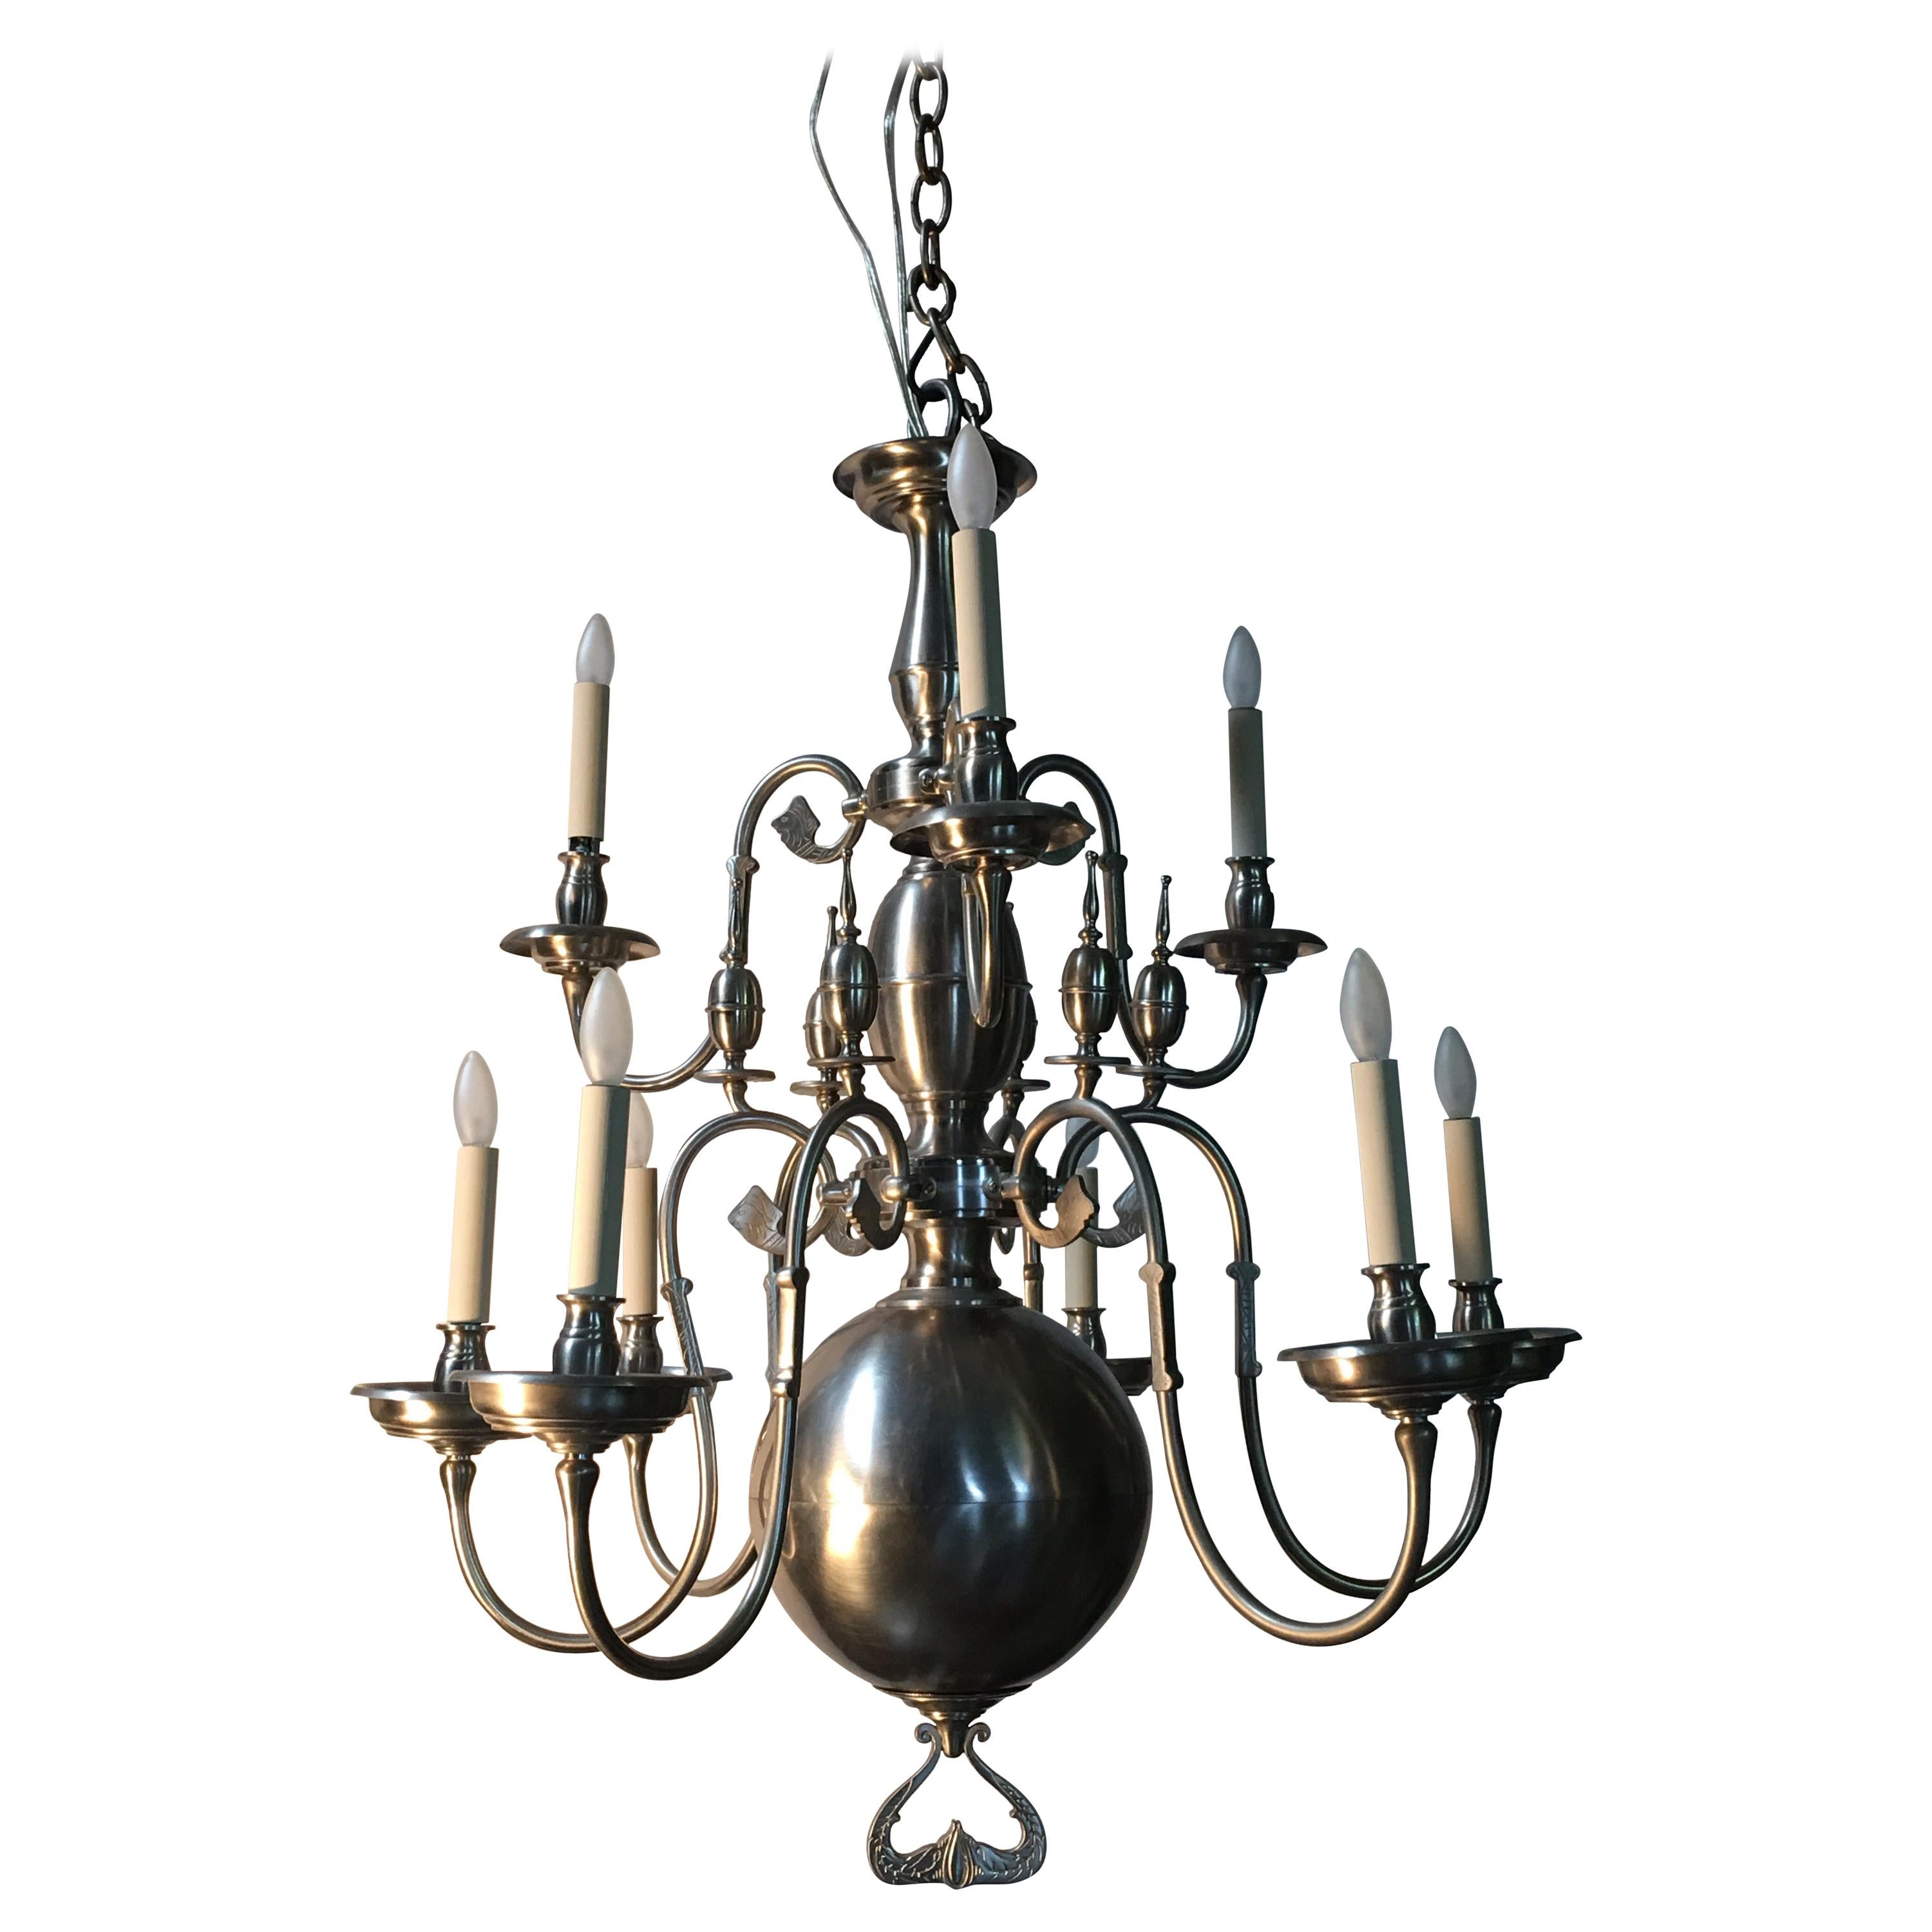 19th Century Flemish Chandelier with a Pewter Finish